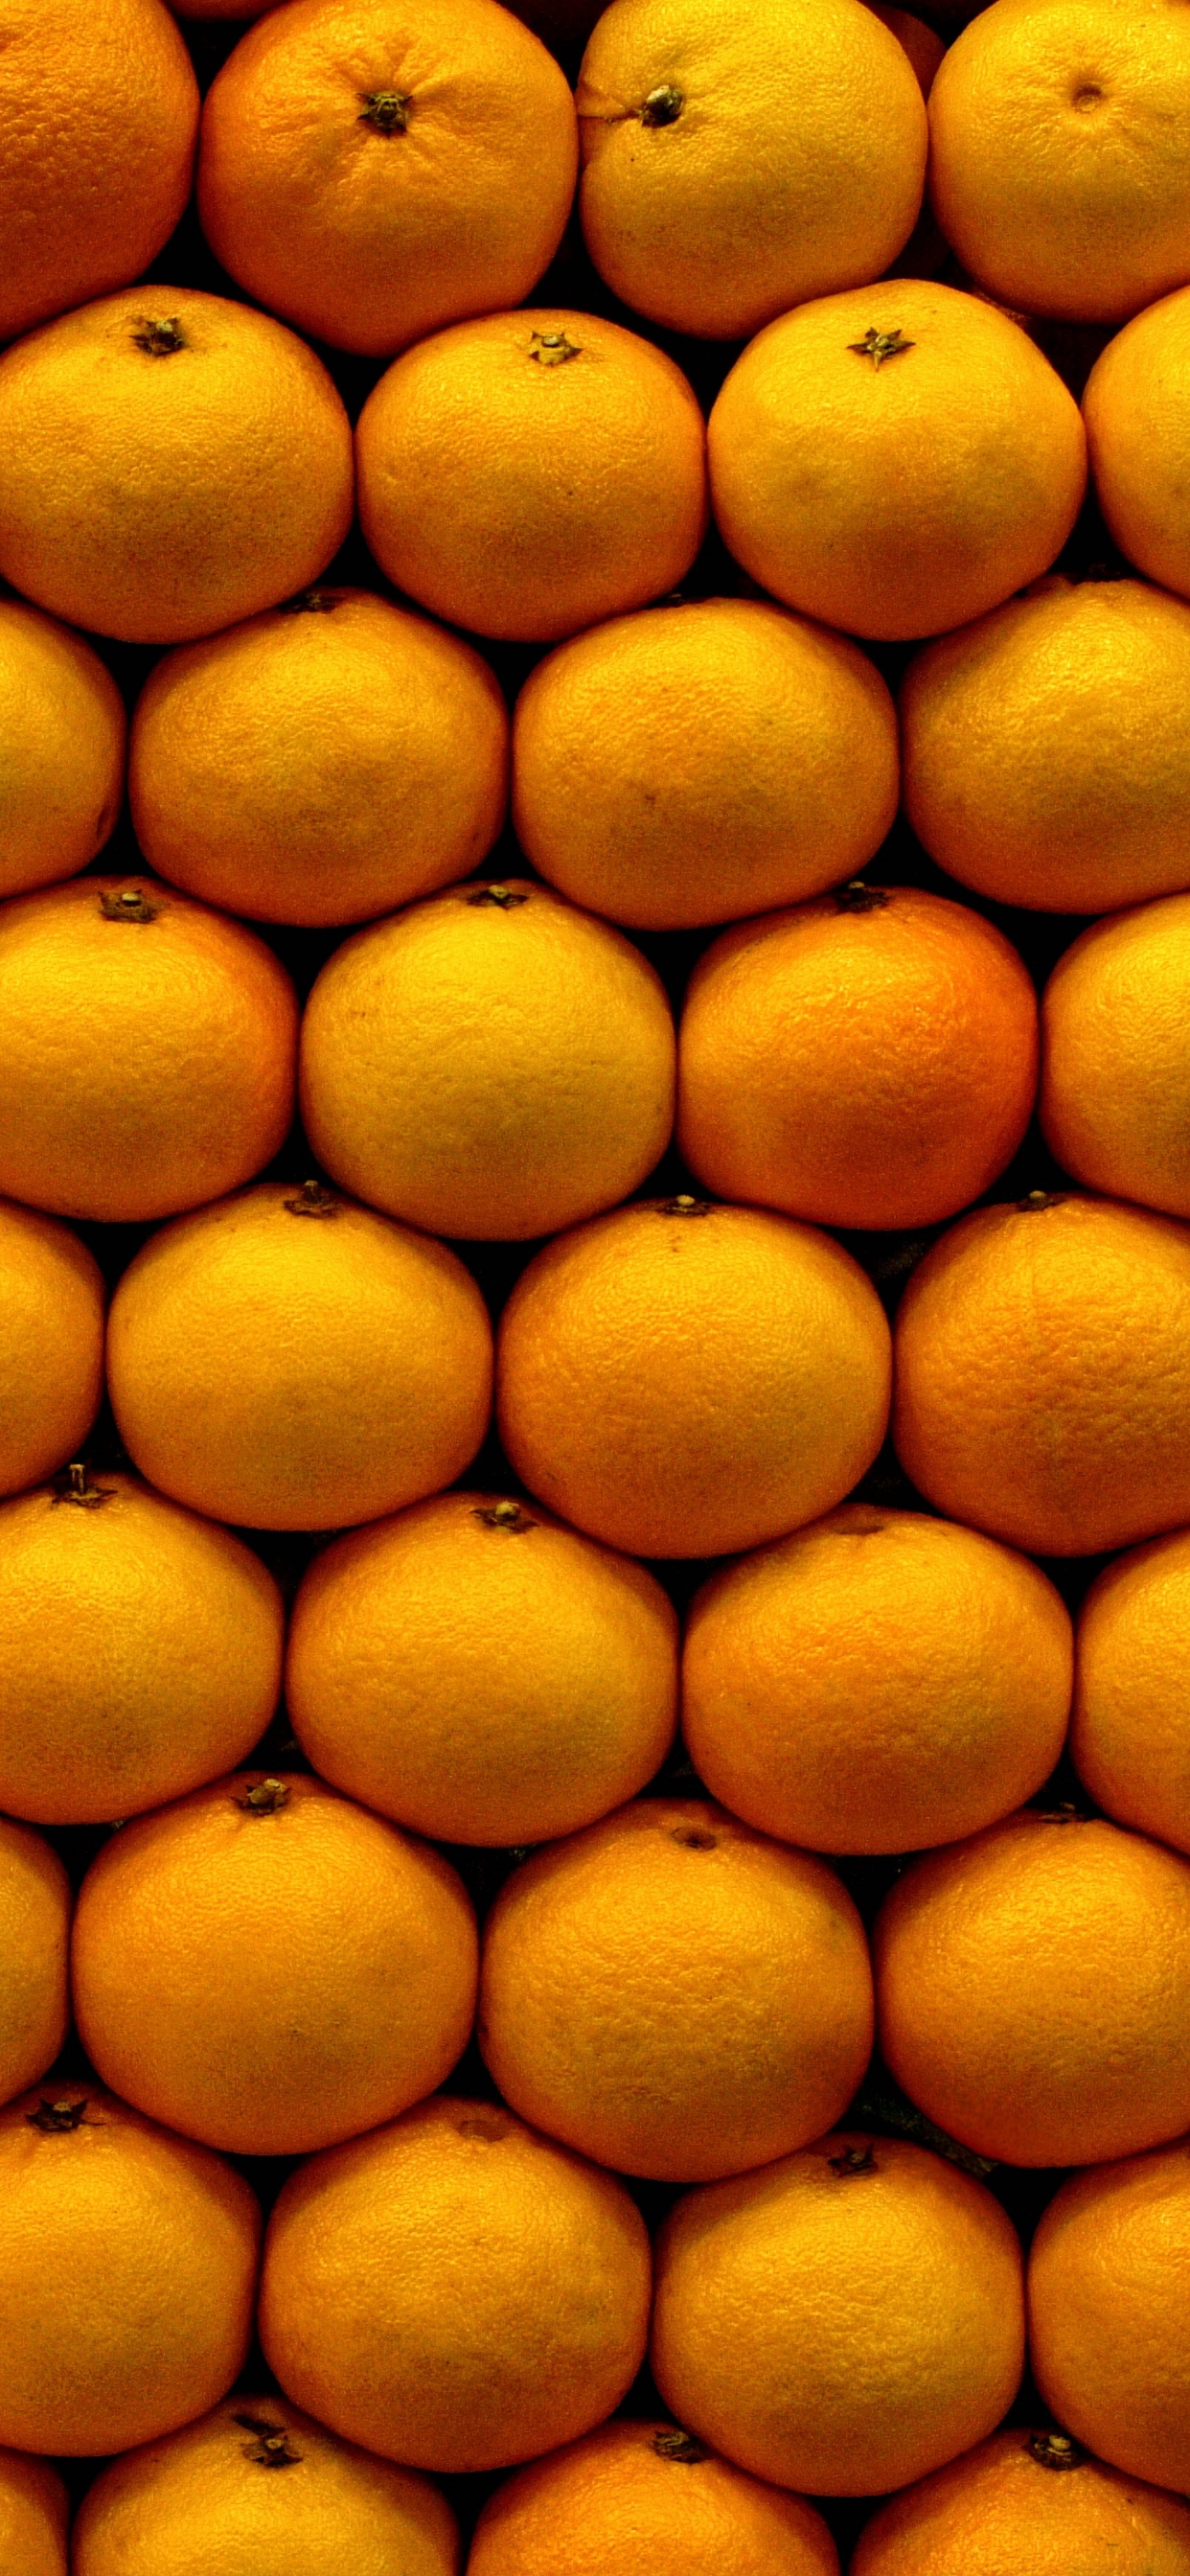 Yellow Round Fruits on White Surface. Wallpaper in 1242x2688 Resolution